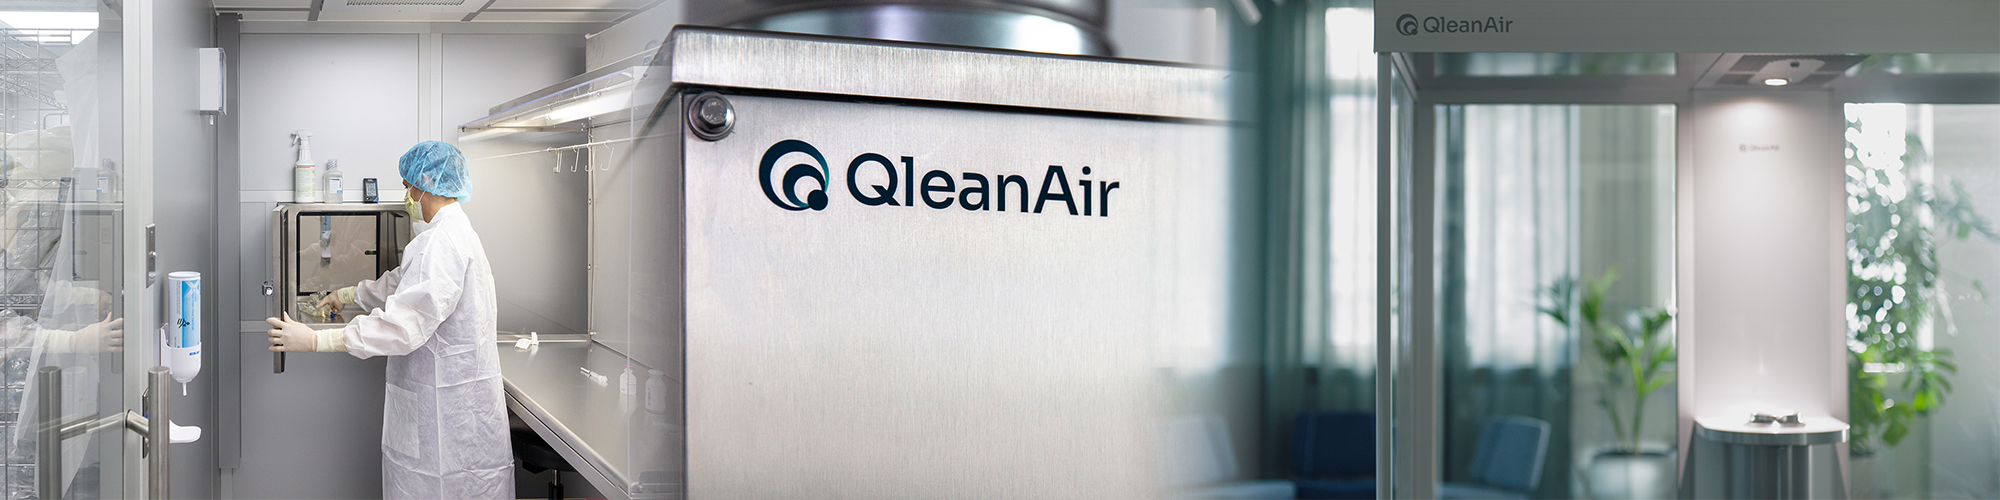 Priveq sells remaining shares in QleanAir